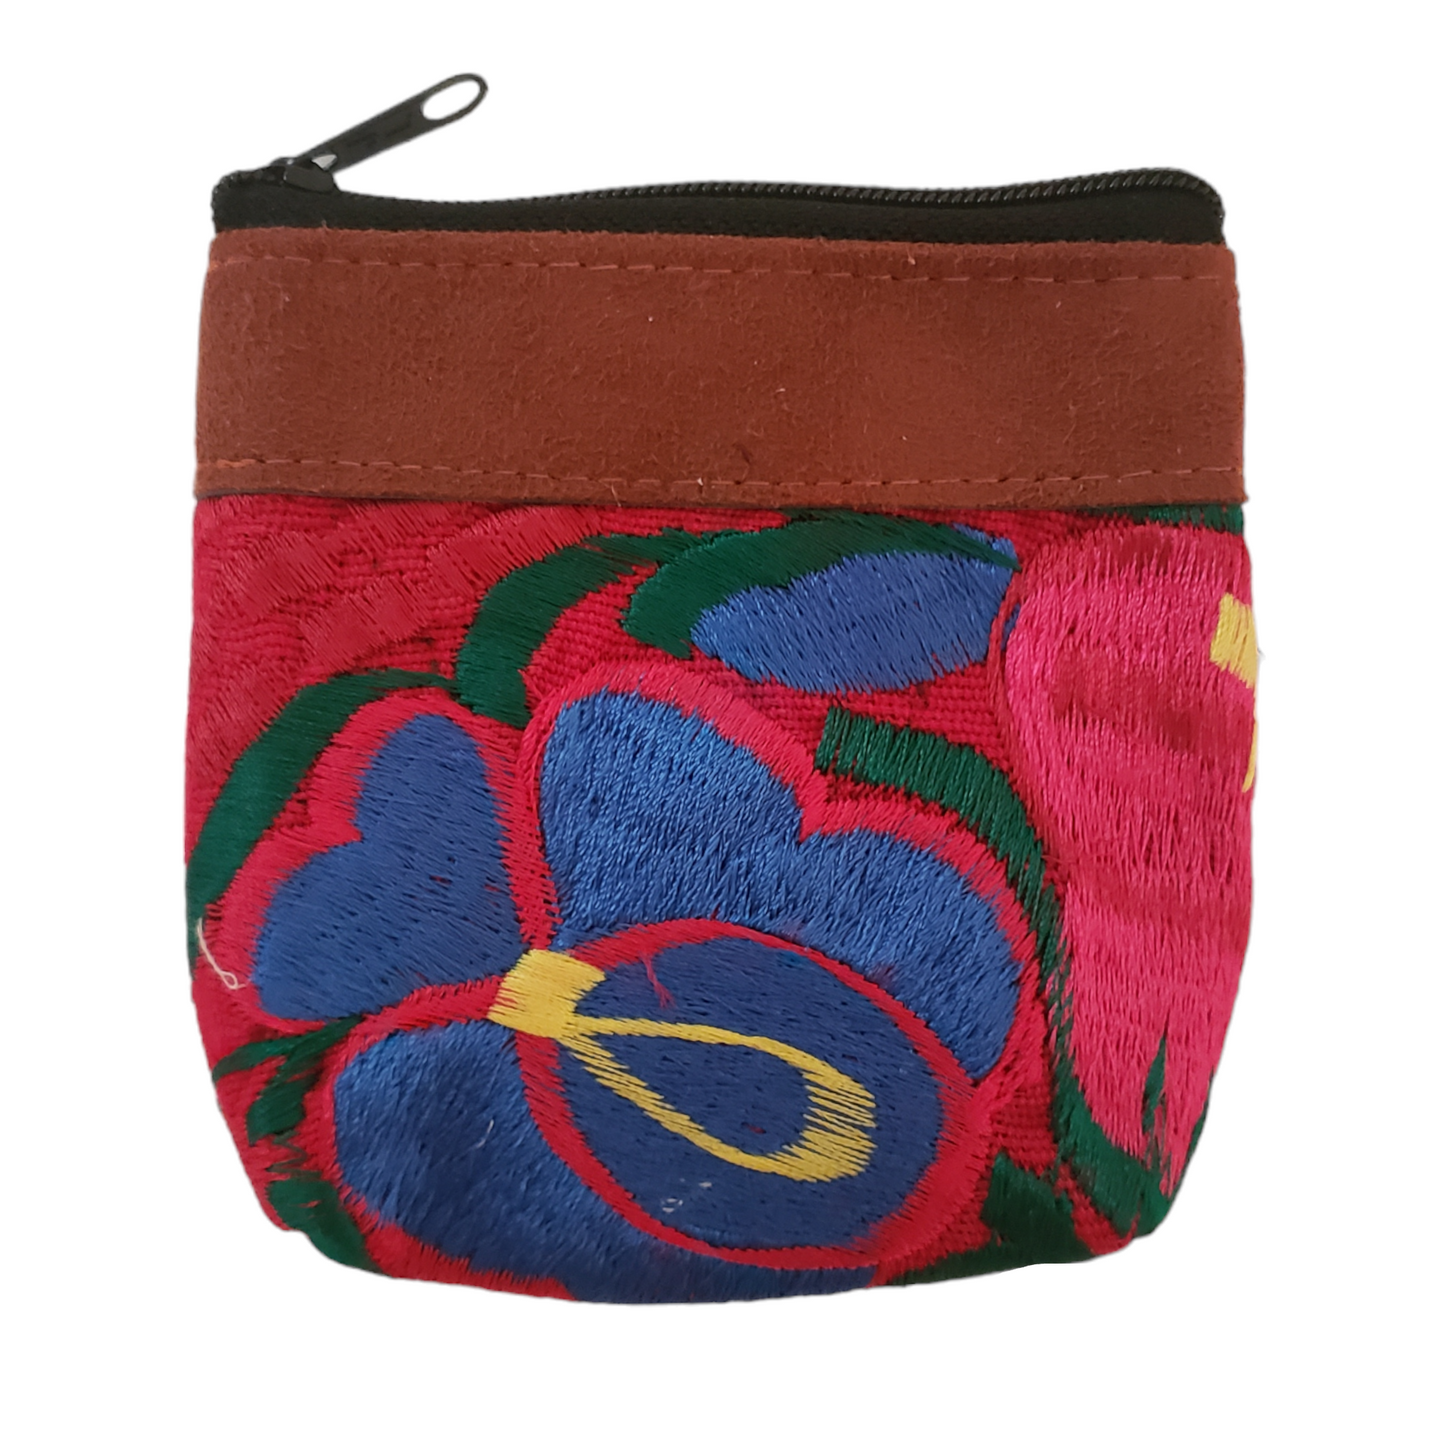 Embroidered Mexican Coin Purse from Oaxaca Mexico